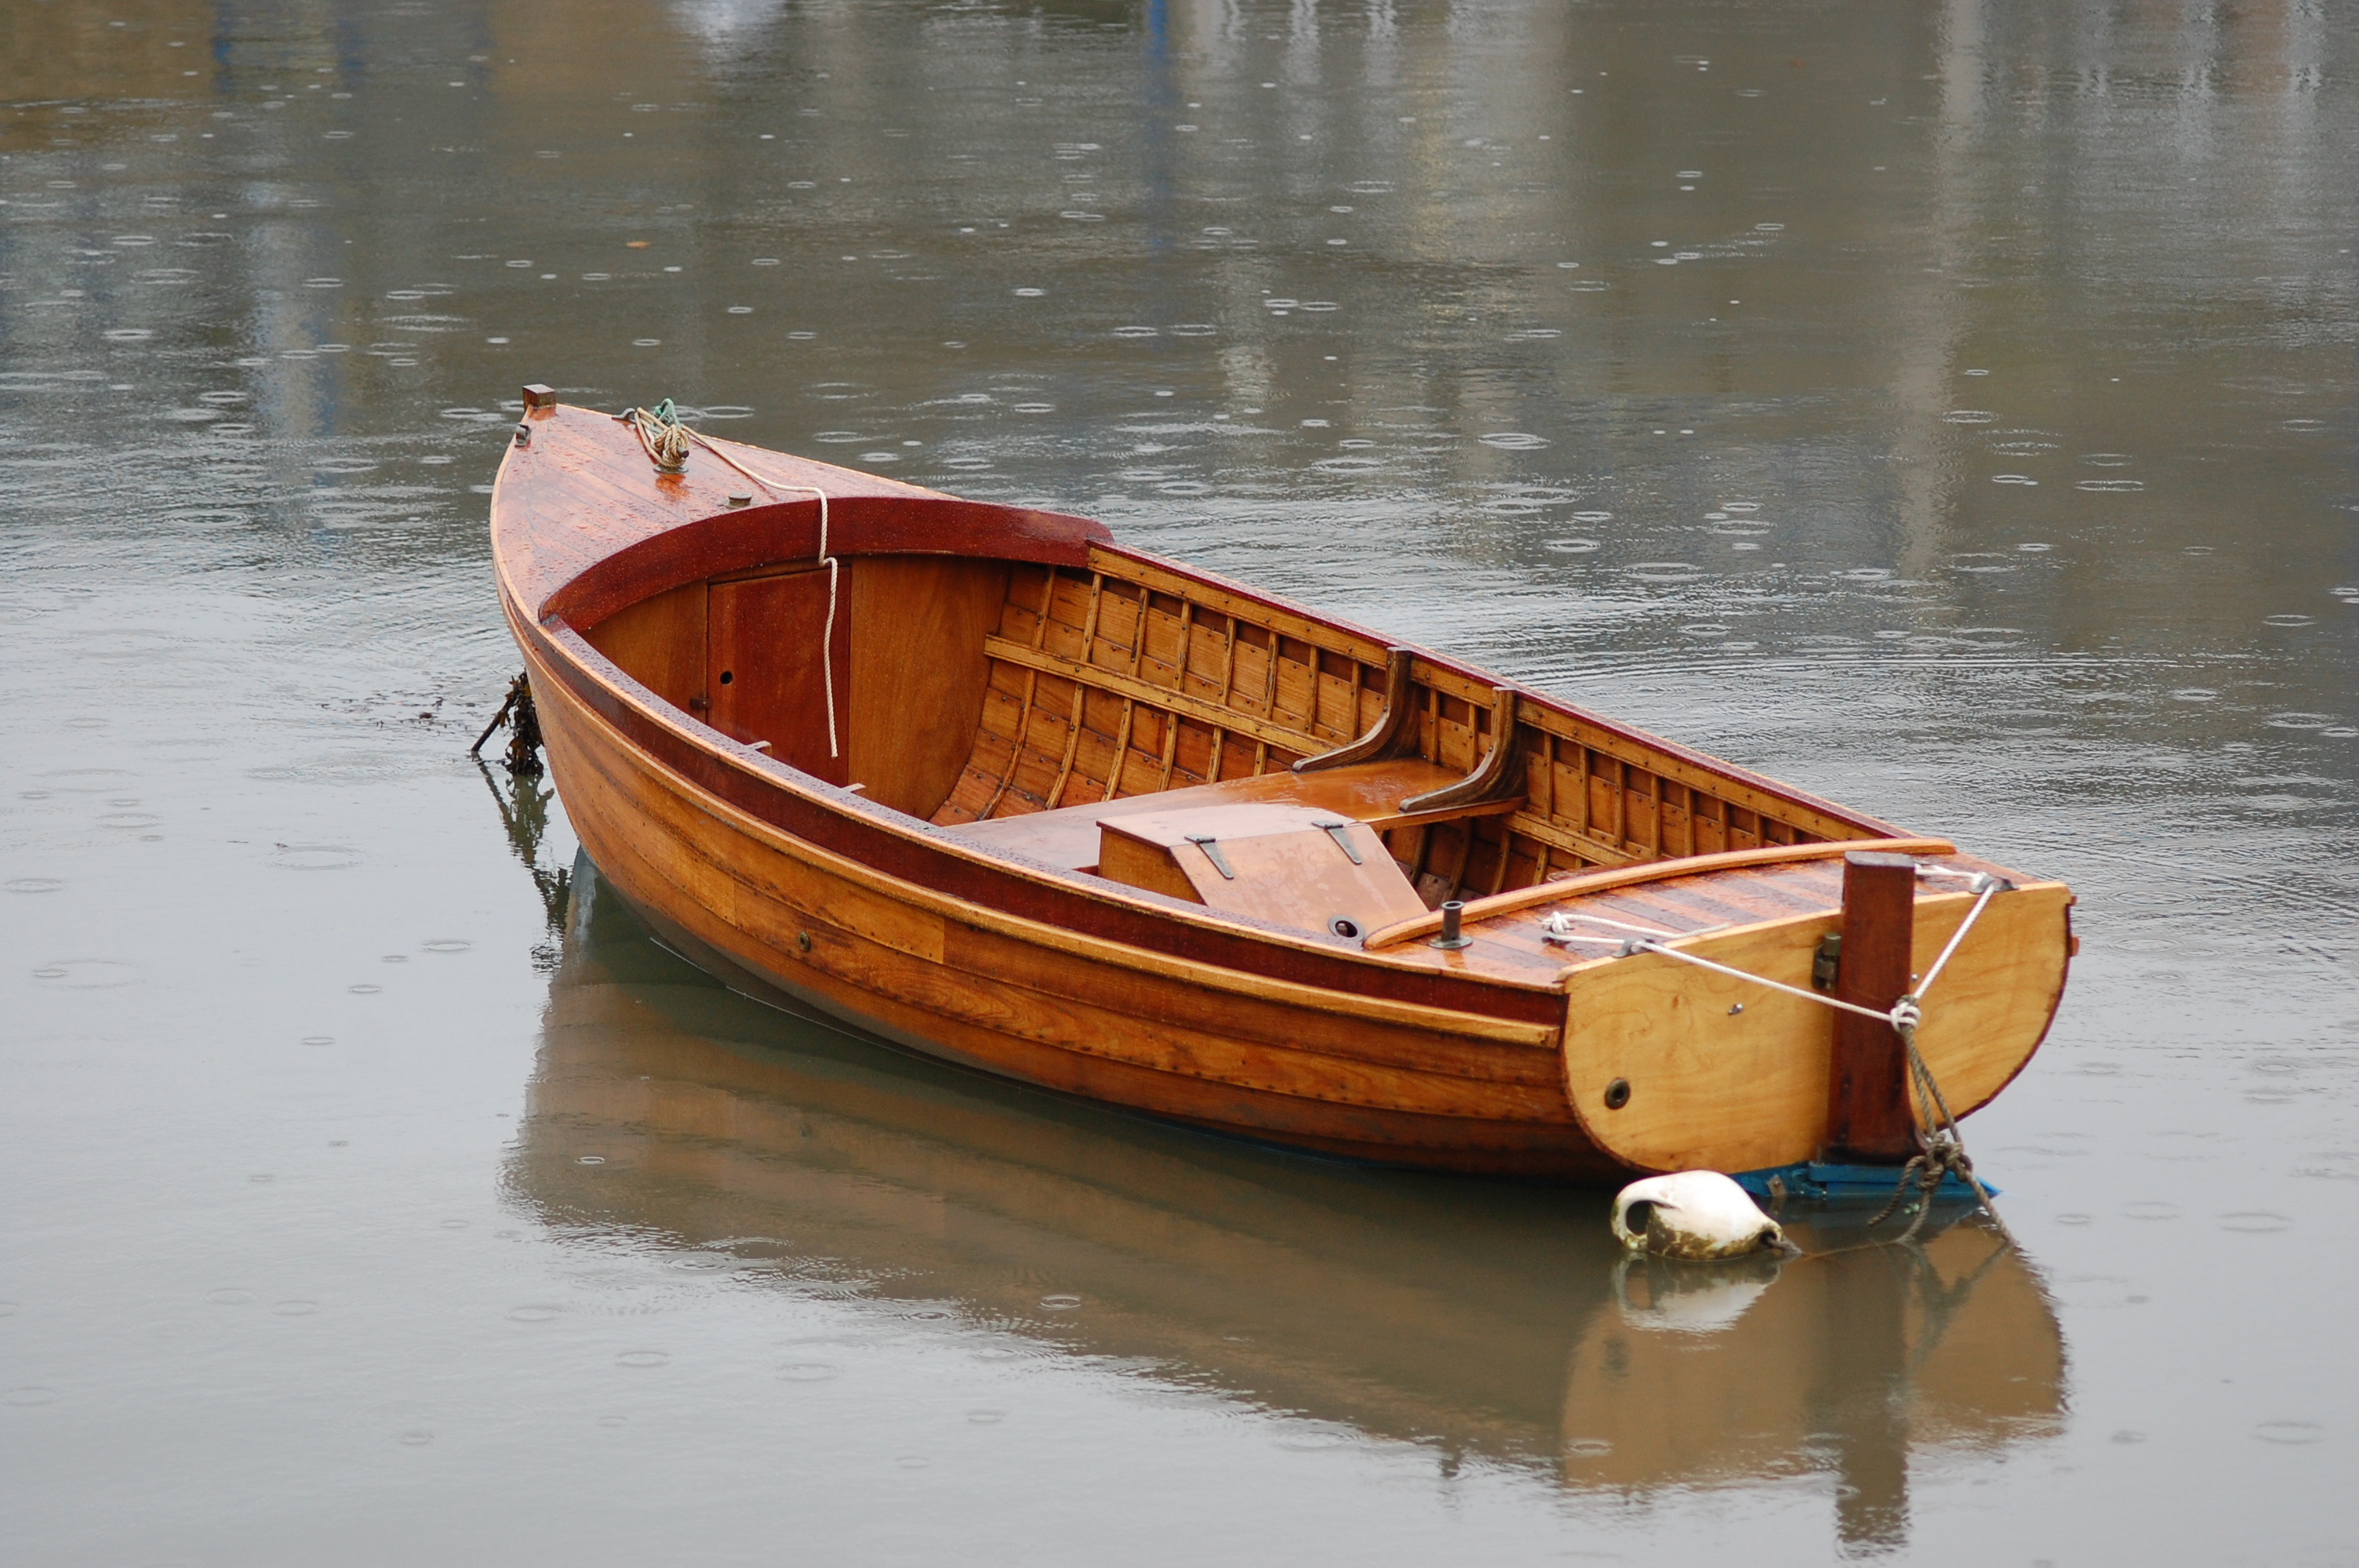 Wooden Boats: How to survey - The International Institute of